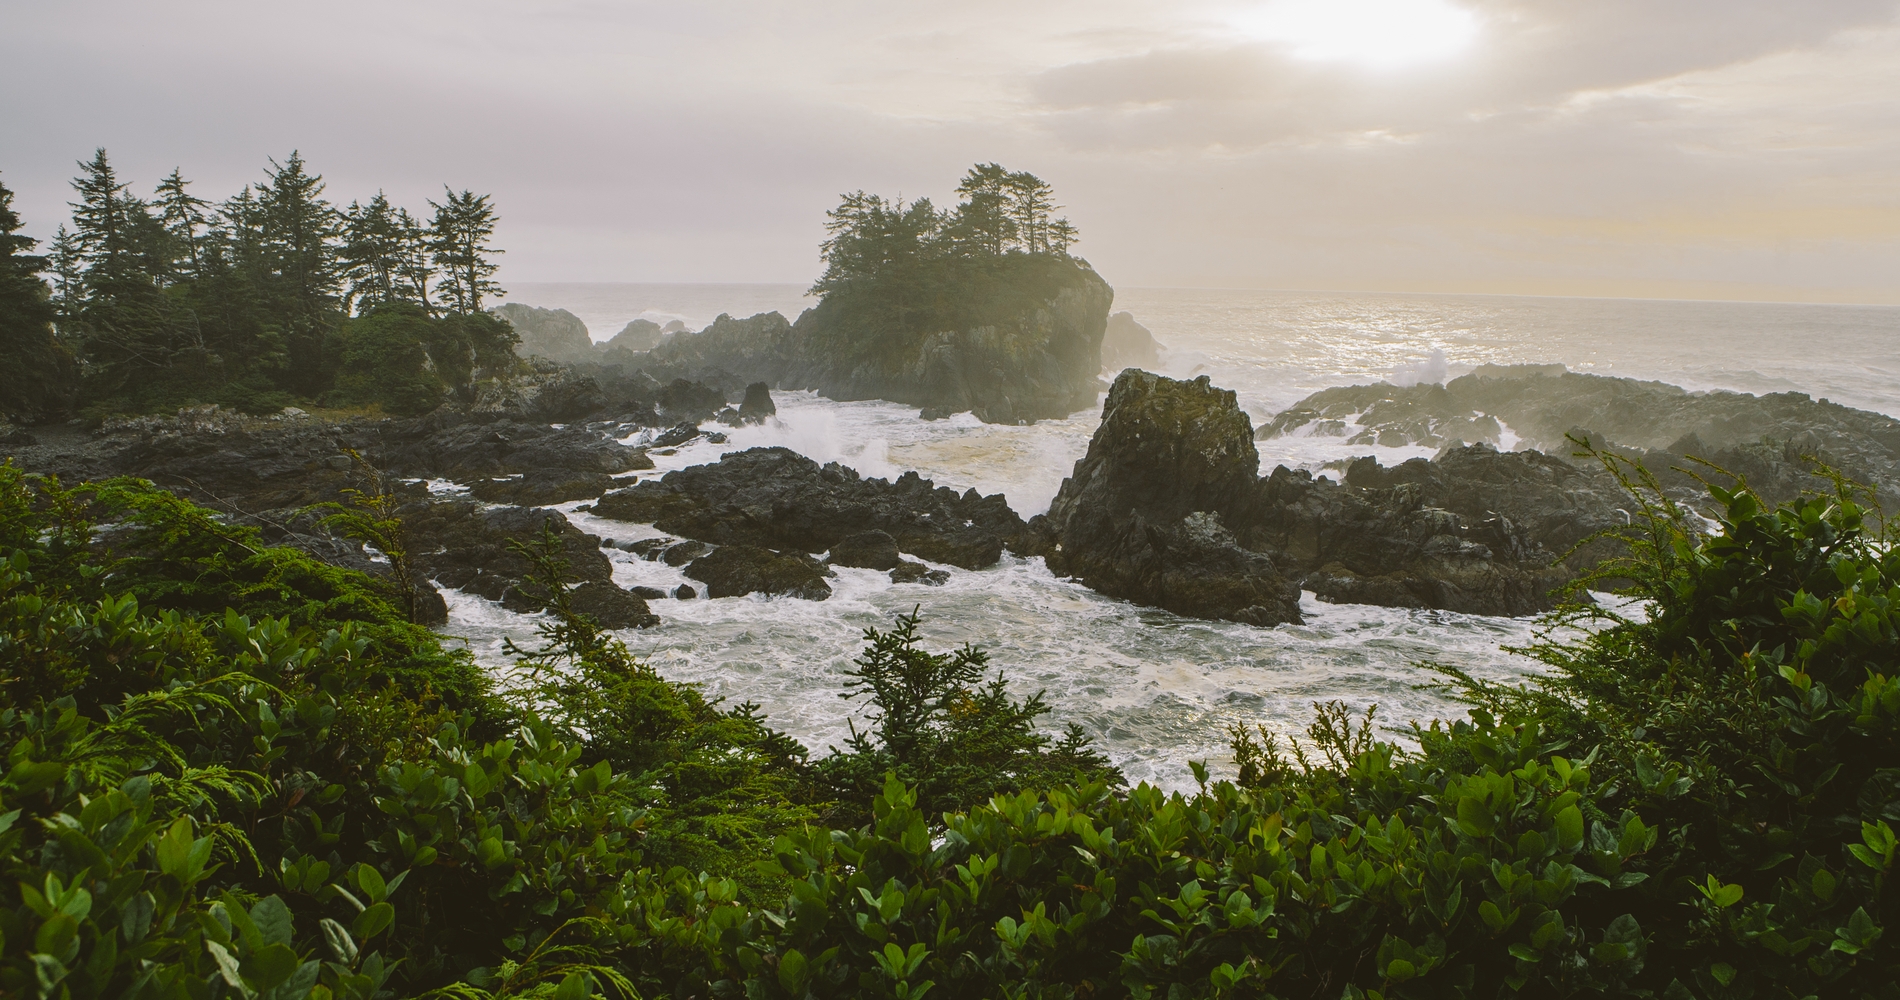 Sunrise at Wild Pacific Trail, the Coast of Vancouver Island in Ucluelet. The waves crash long the rocky shoreline and several small rocky outcrops are in the water.